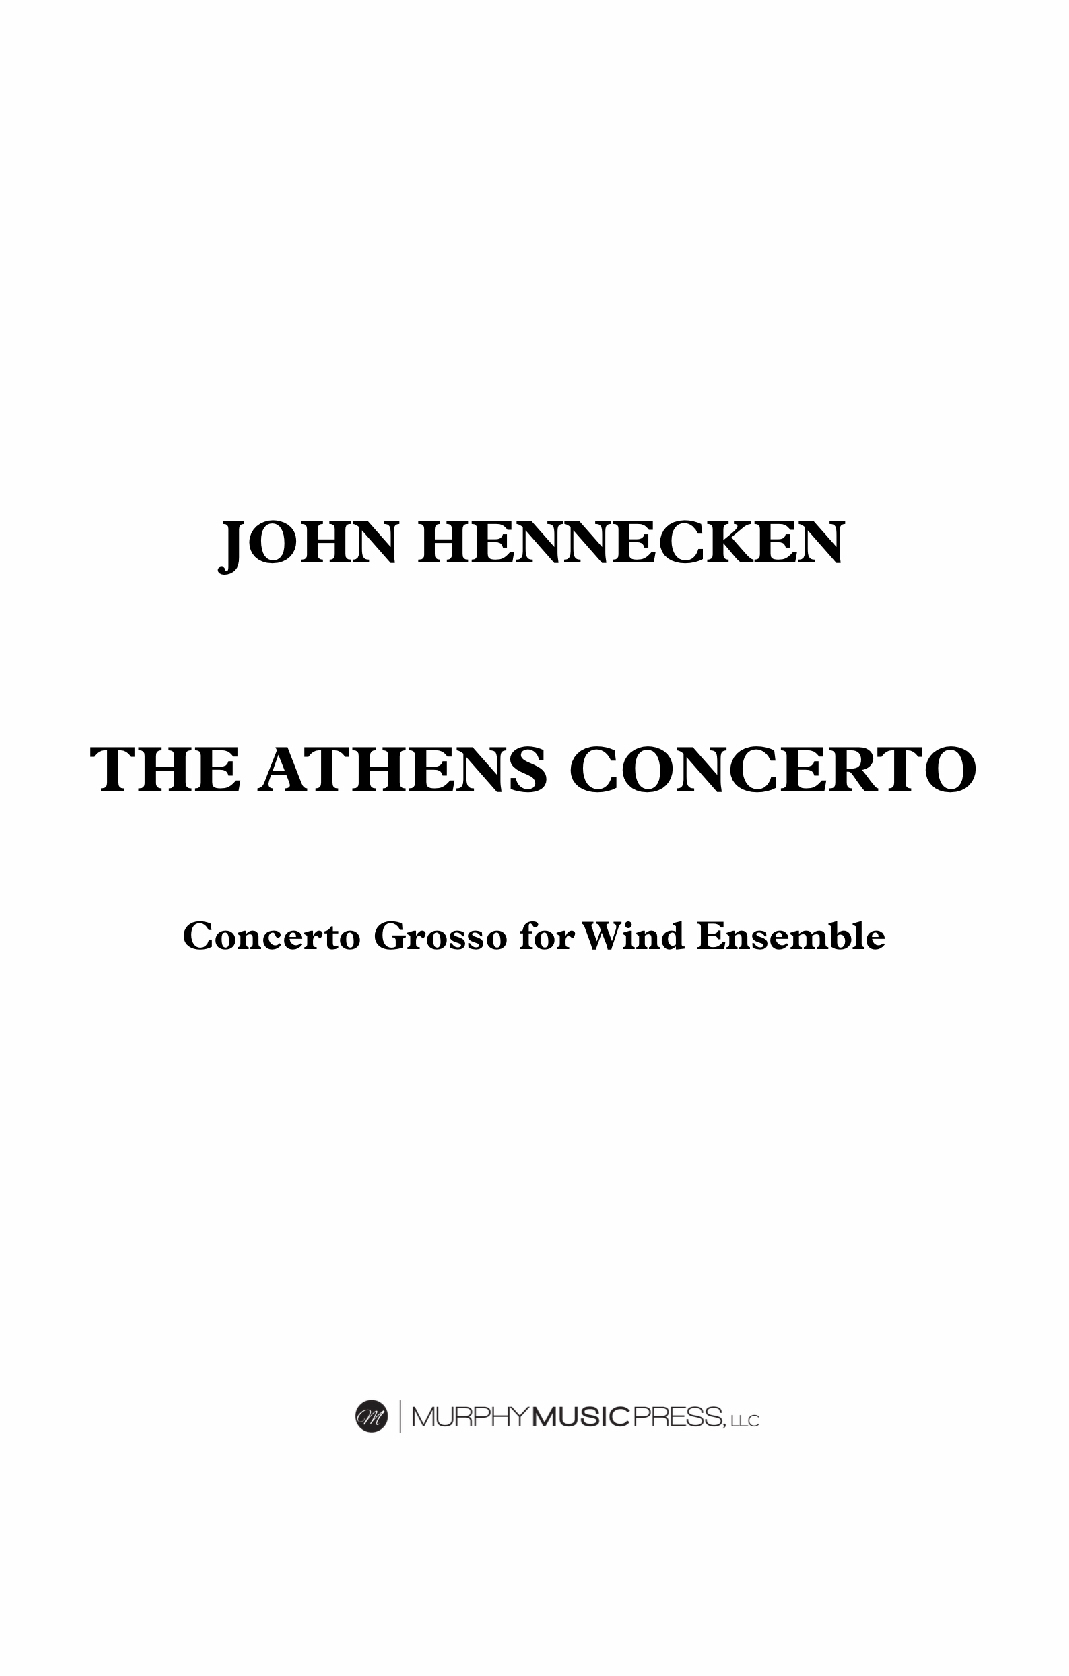 The Athens Concerto (Score Only) by John Hennecken